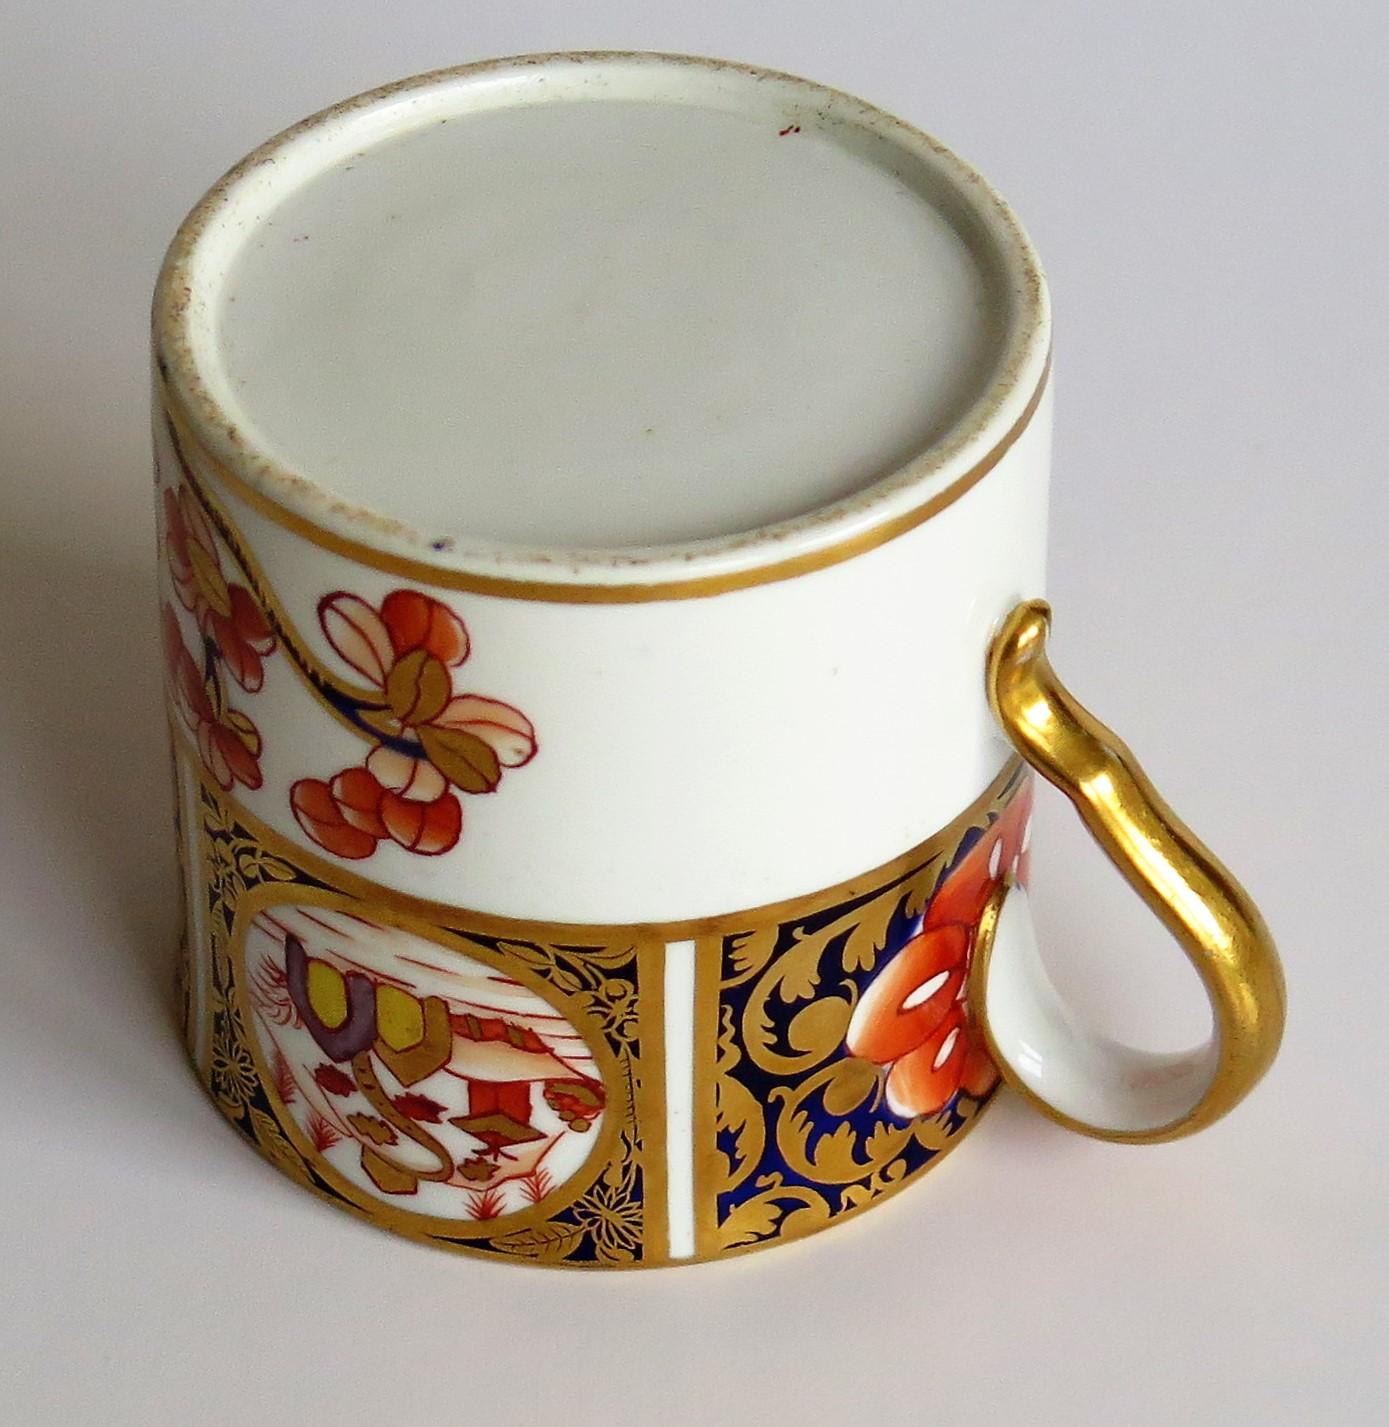 Fine George IIIrd Spode Coffee Can Richly Gilded Hand Painted Ptn. 1956, Ca 1810 10